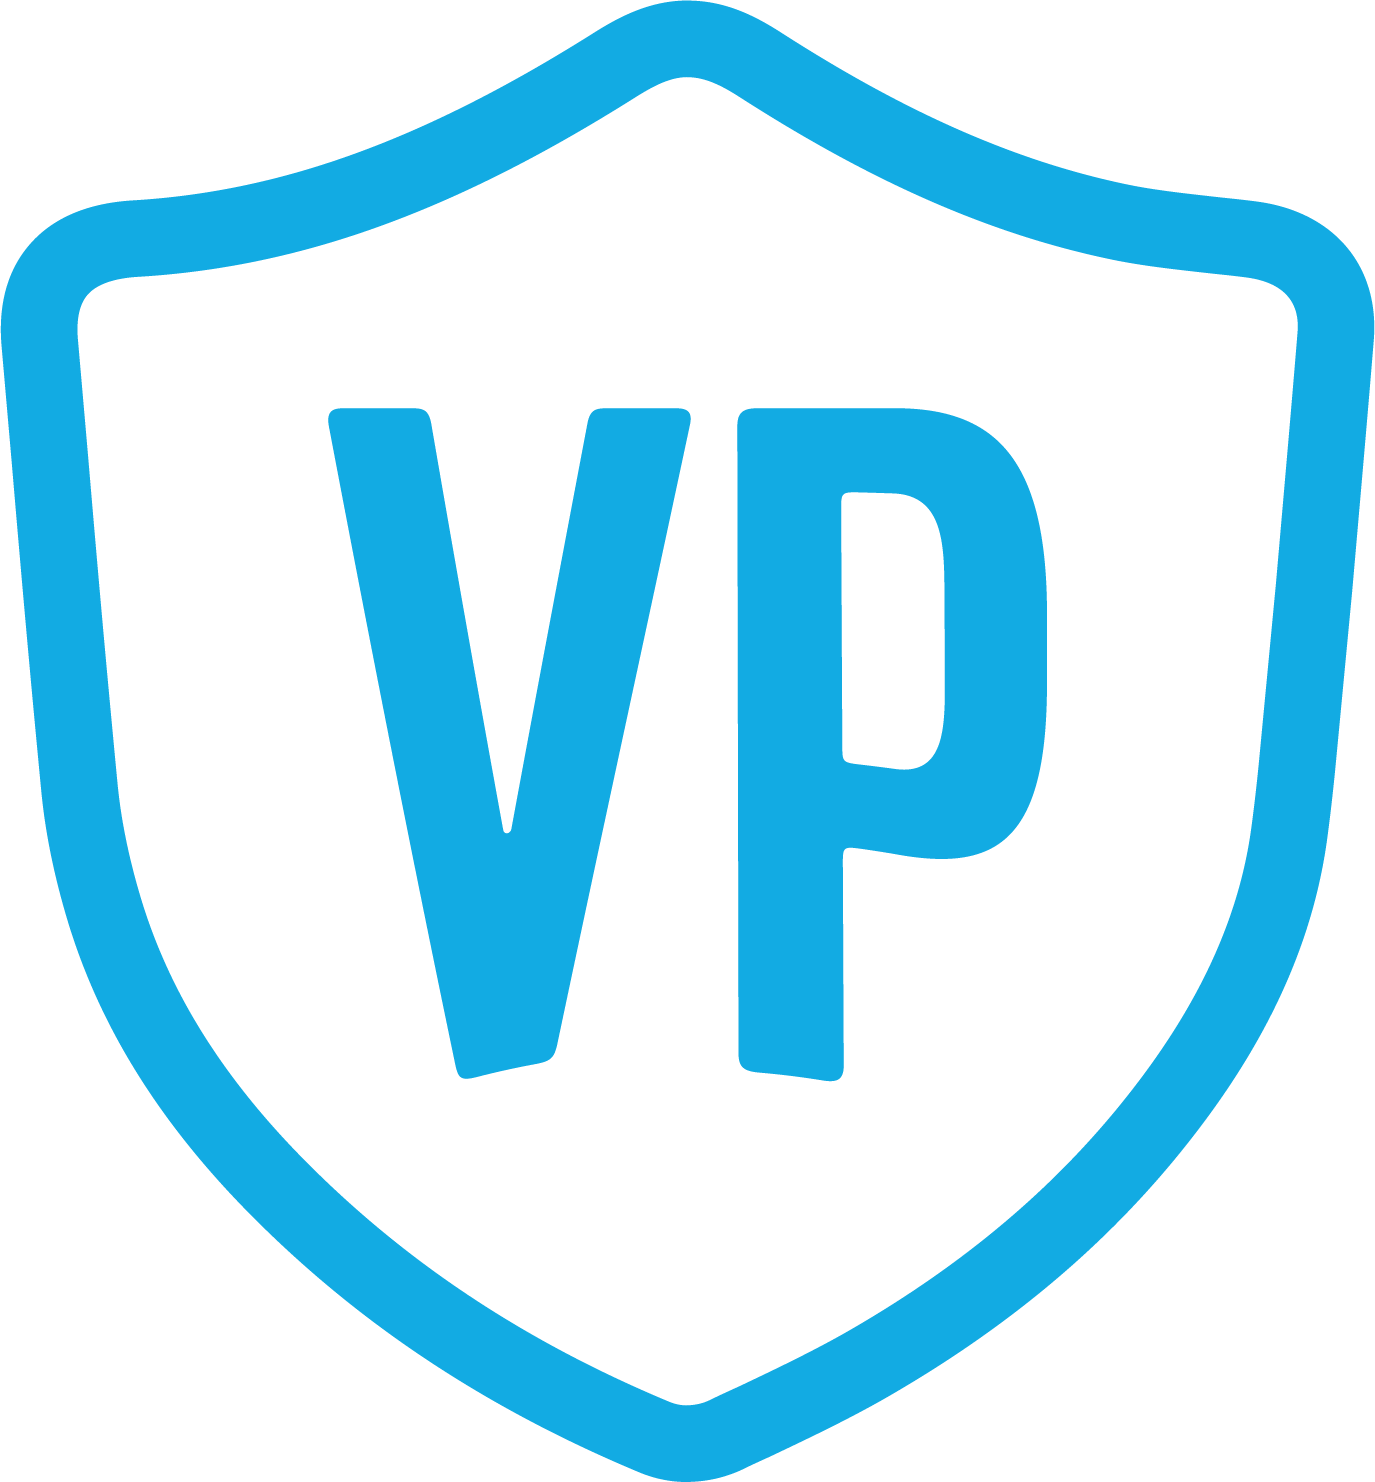 VP logo with a white background.